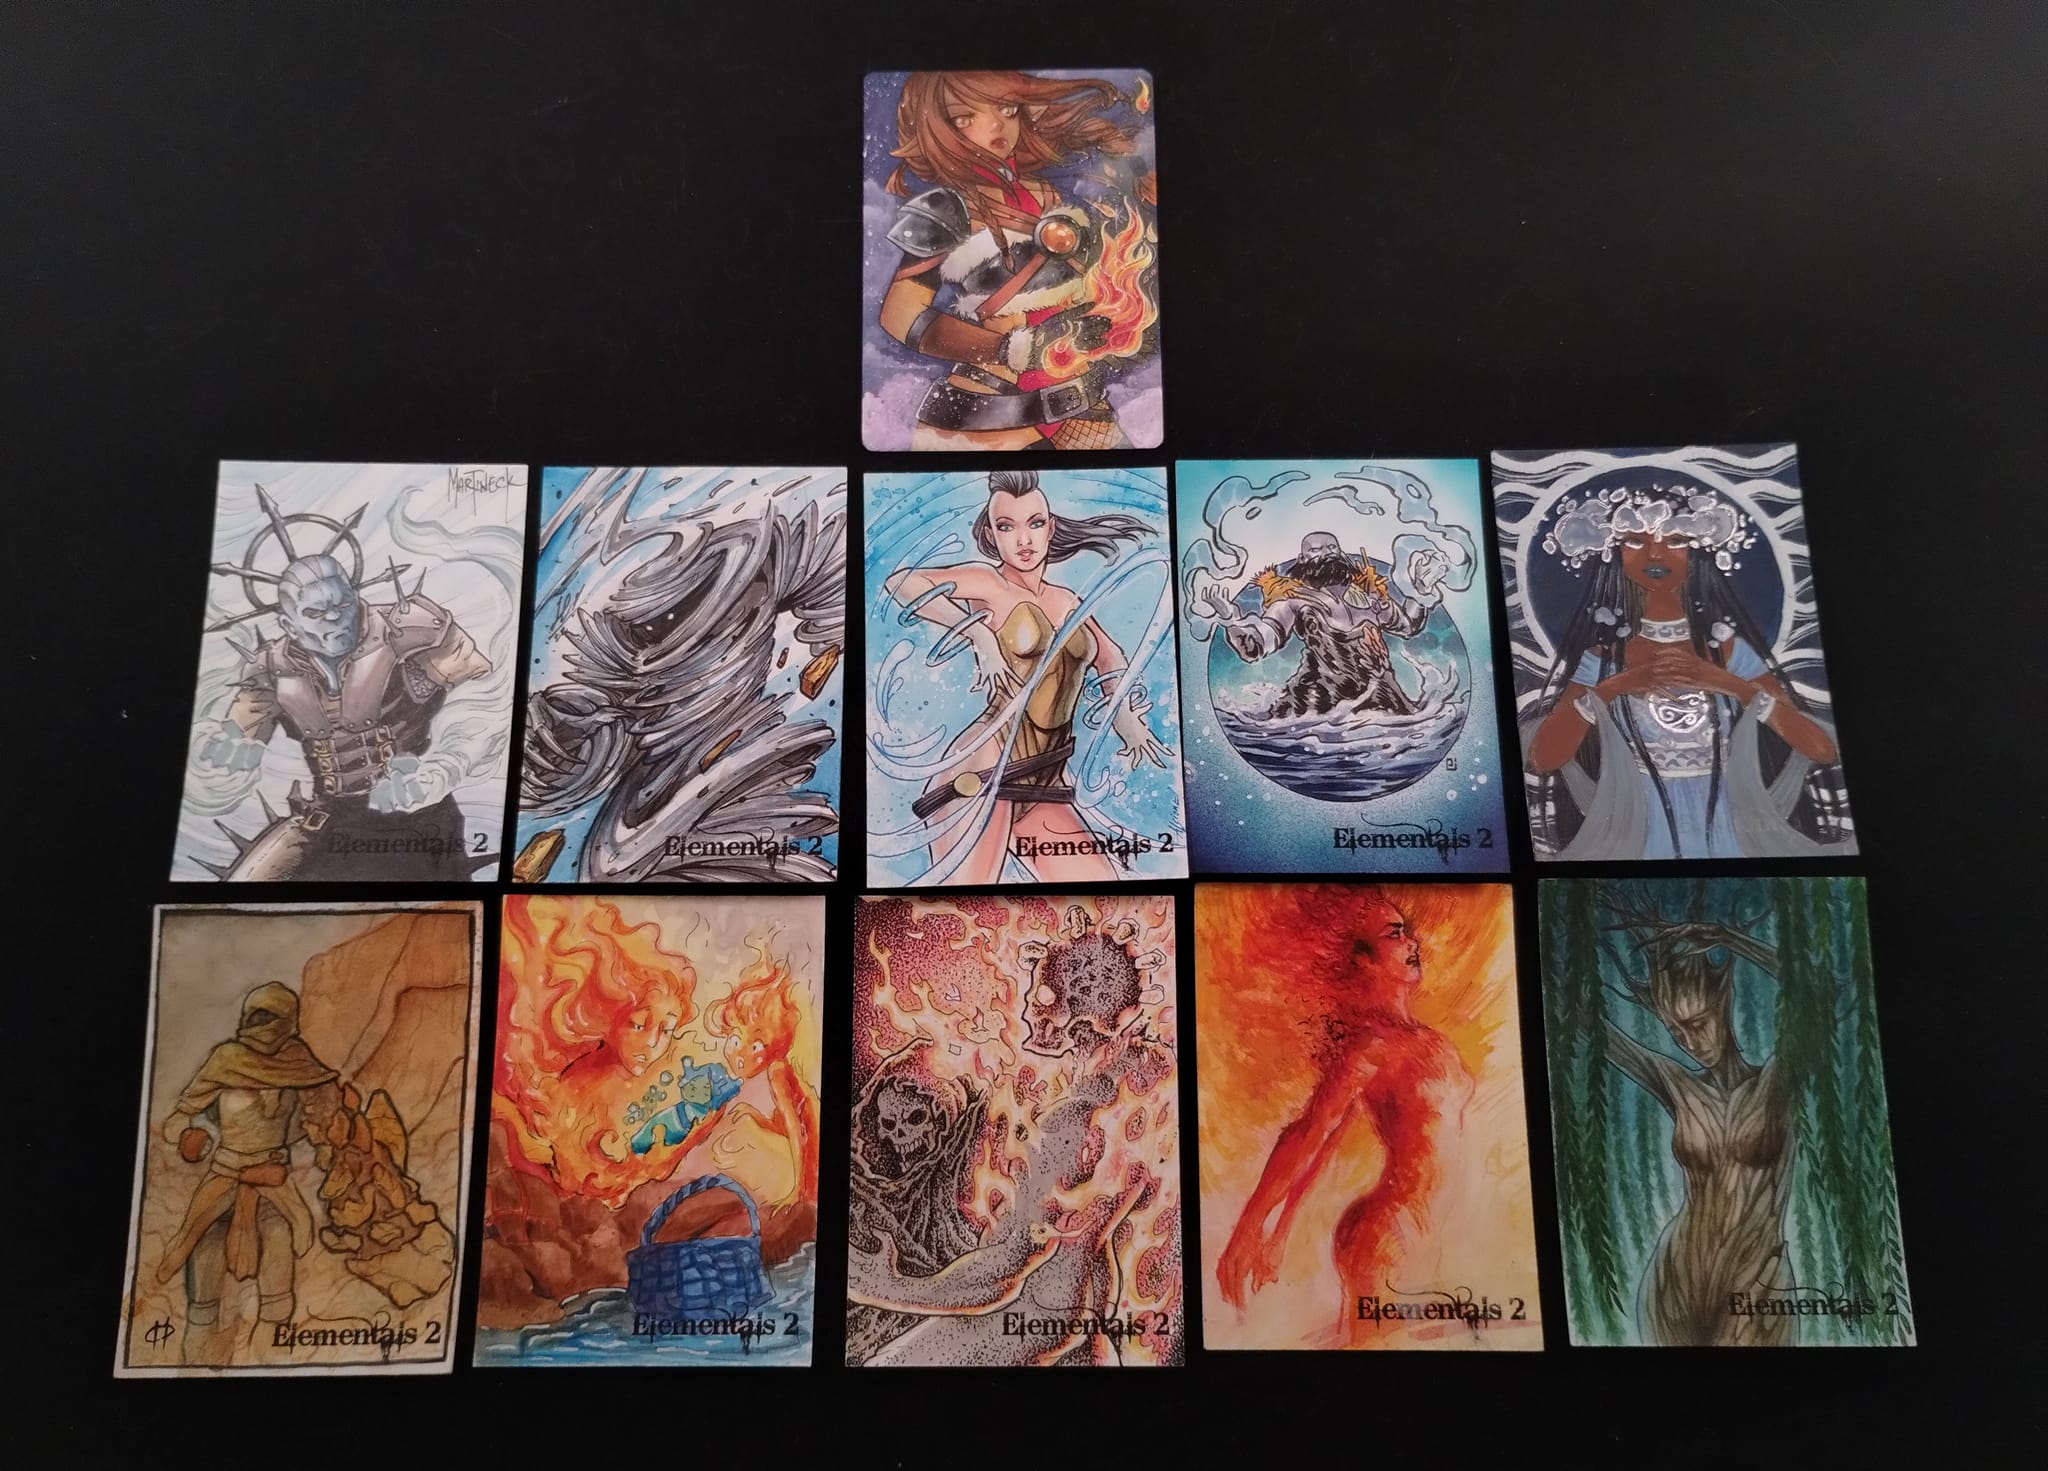 Eleven sketch cards arrayed side by side in rows